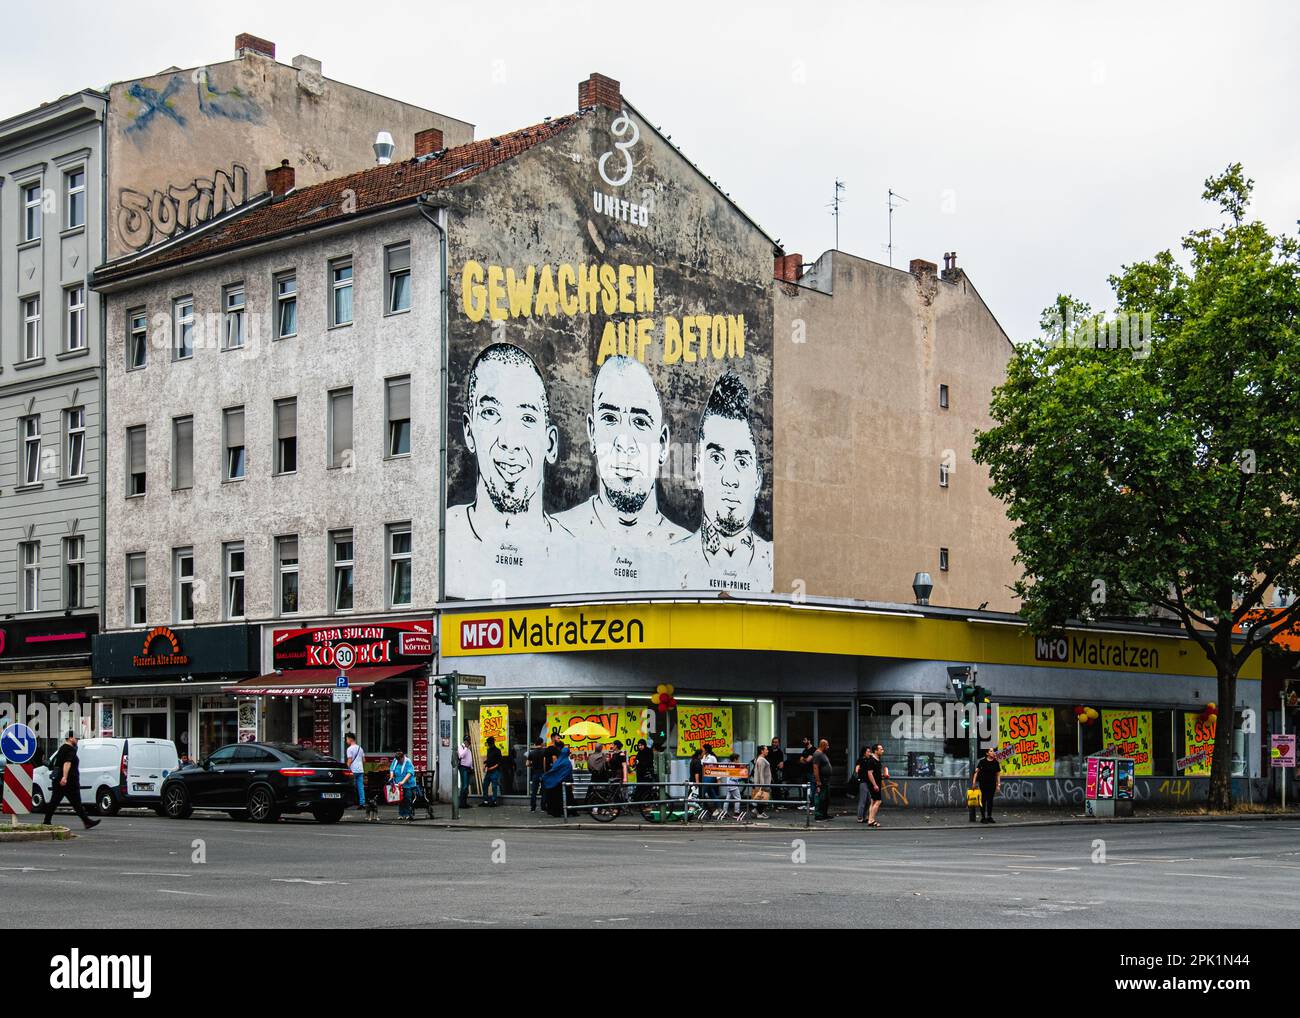 A mural of Boateng brothers, Jerome, George and Kevin-Prince, with a slogan reading 'Grown on concrete’, Gesundbrunnen, Mitte, Berlin Urban Art. Stock Photo